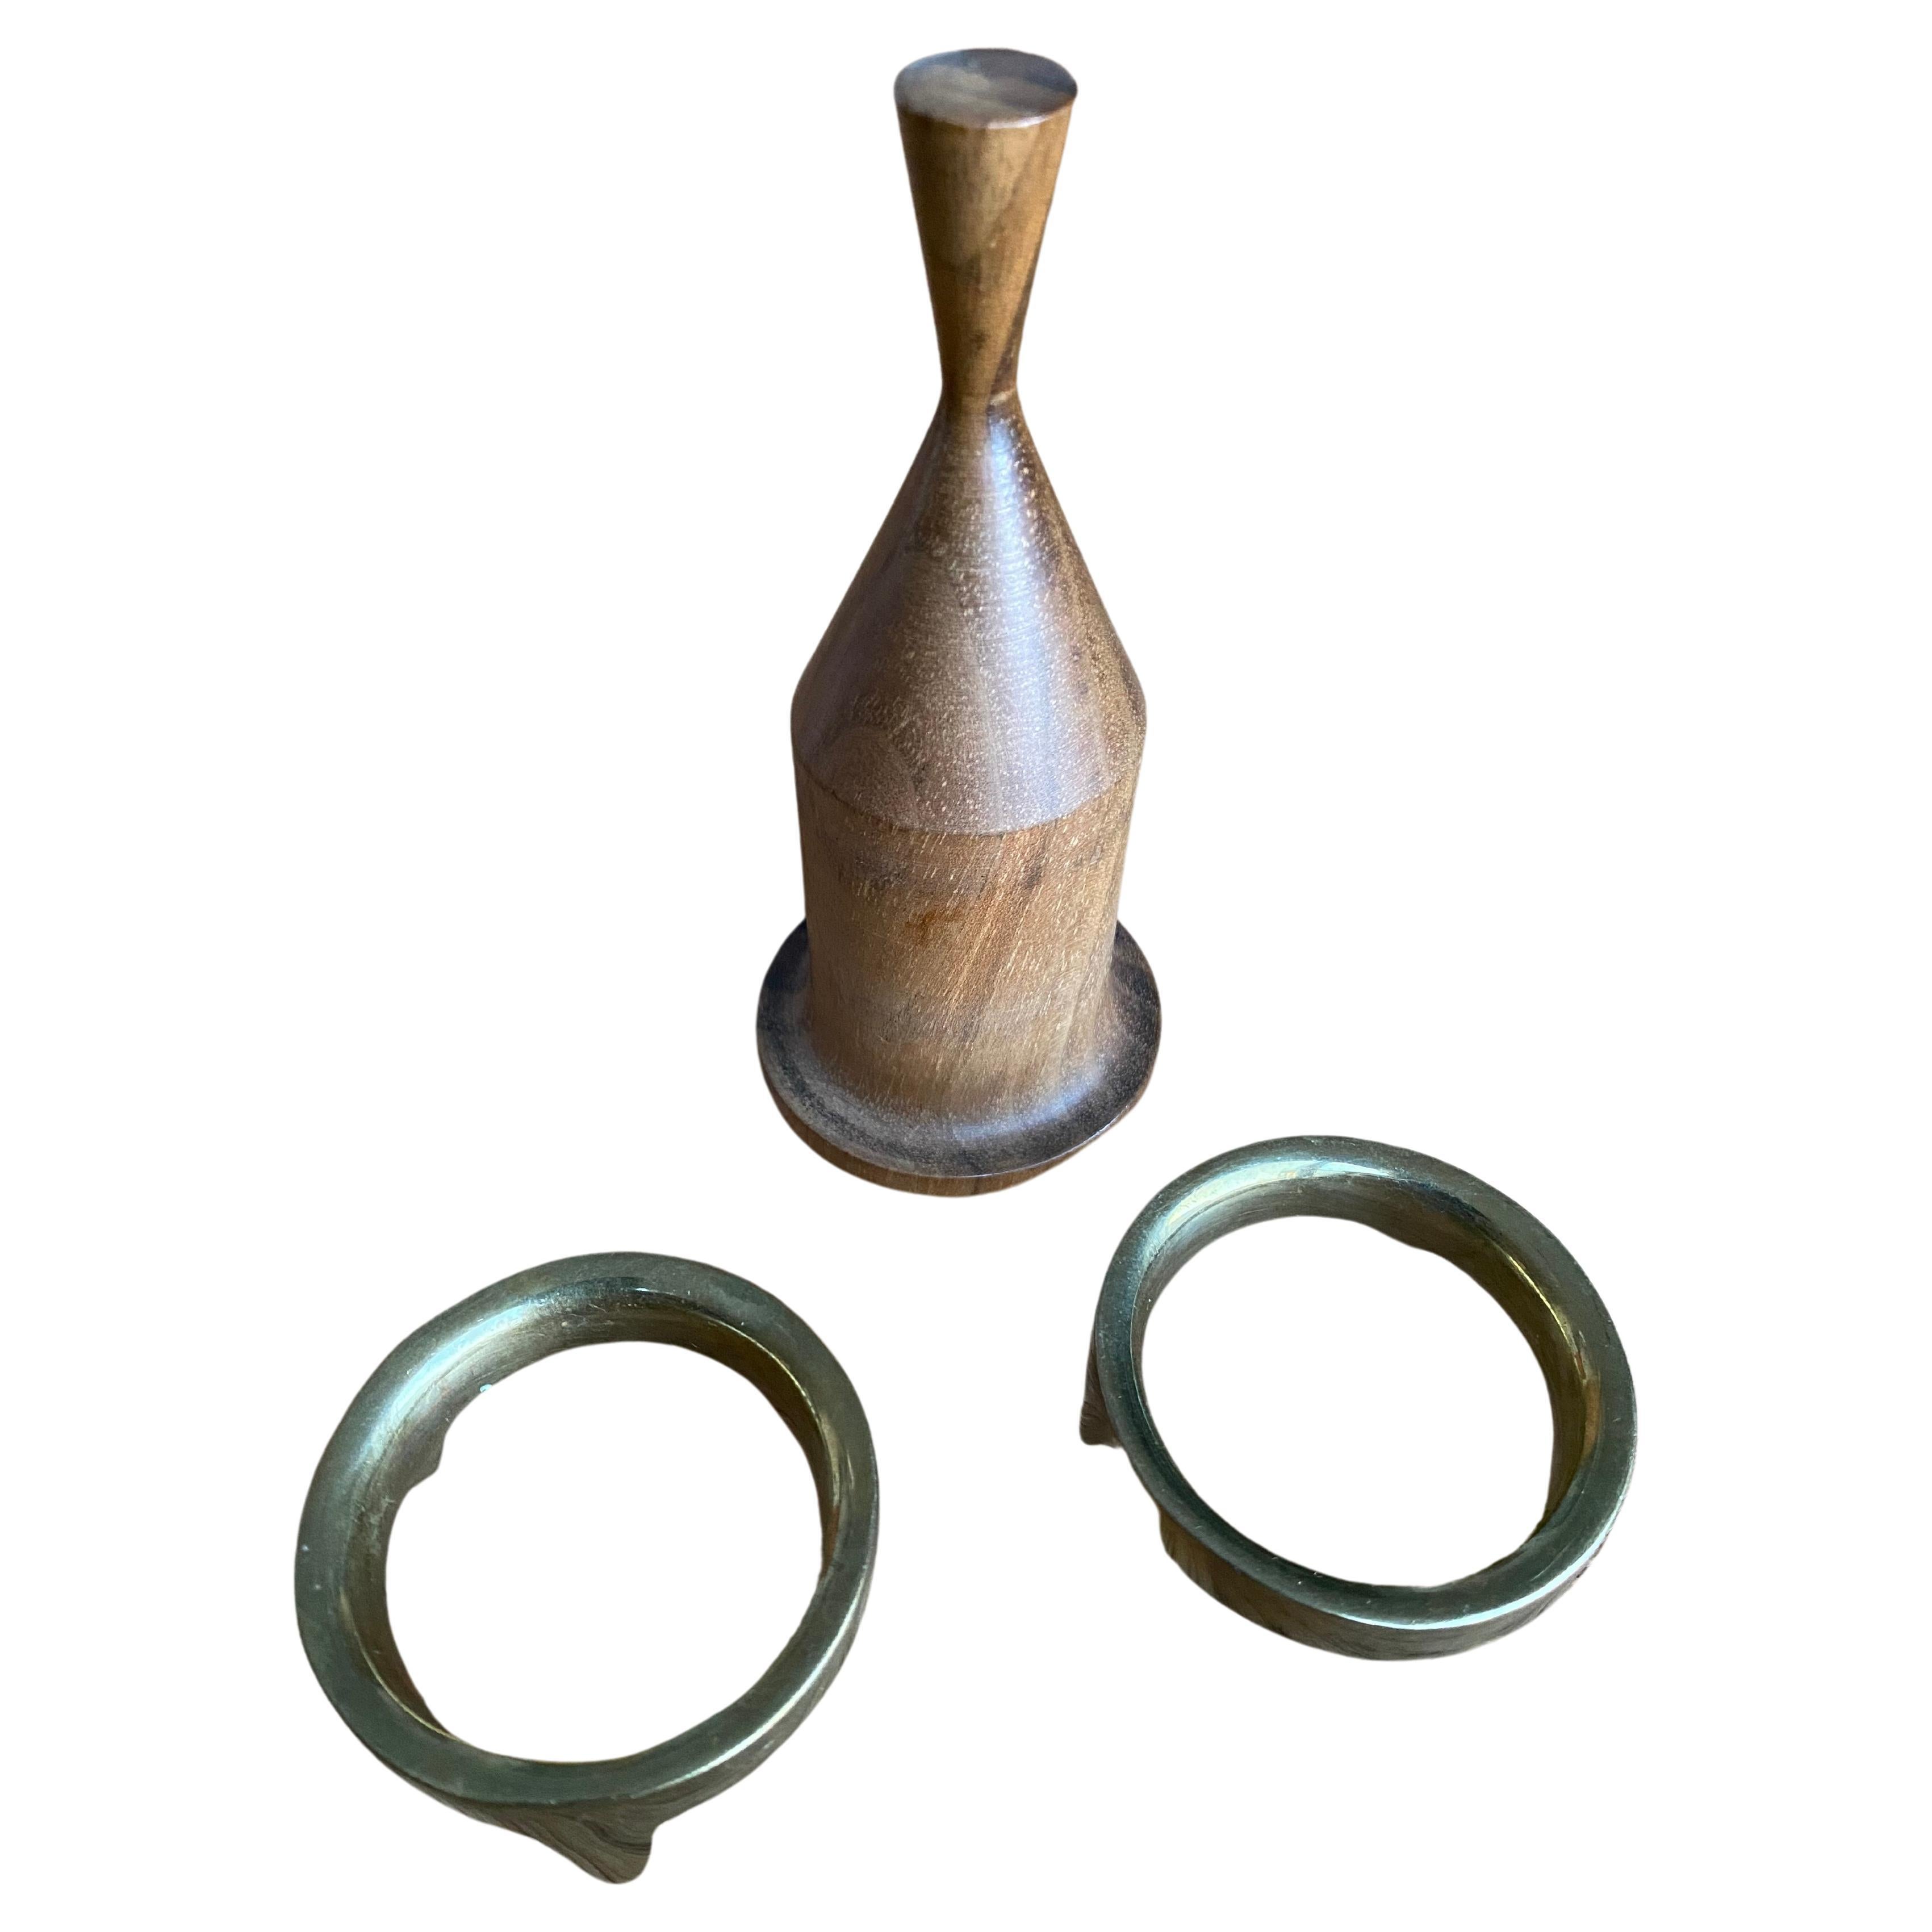 Complete Aubock Egg Holder Set, Designed in the Early 1950s